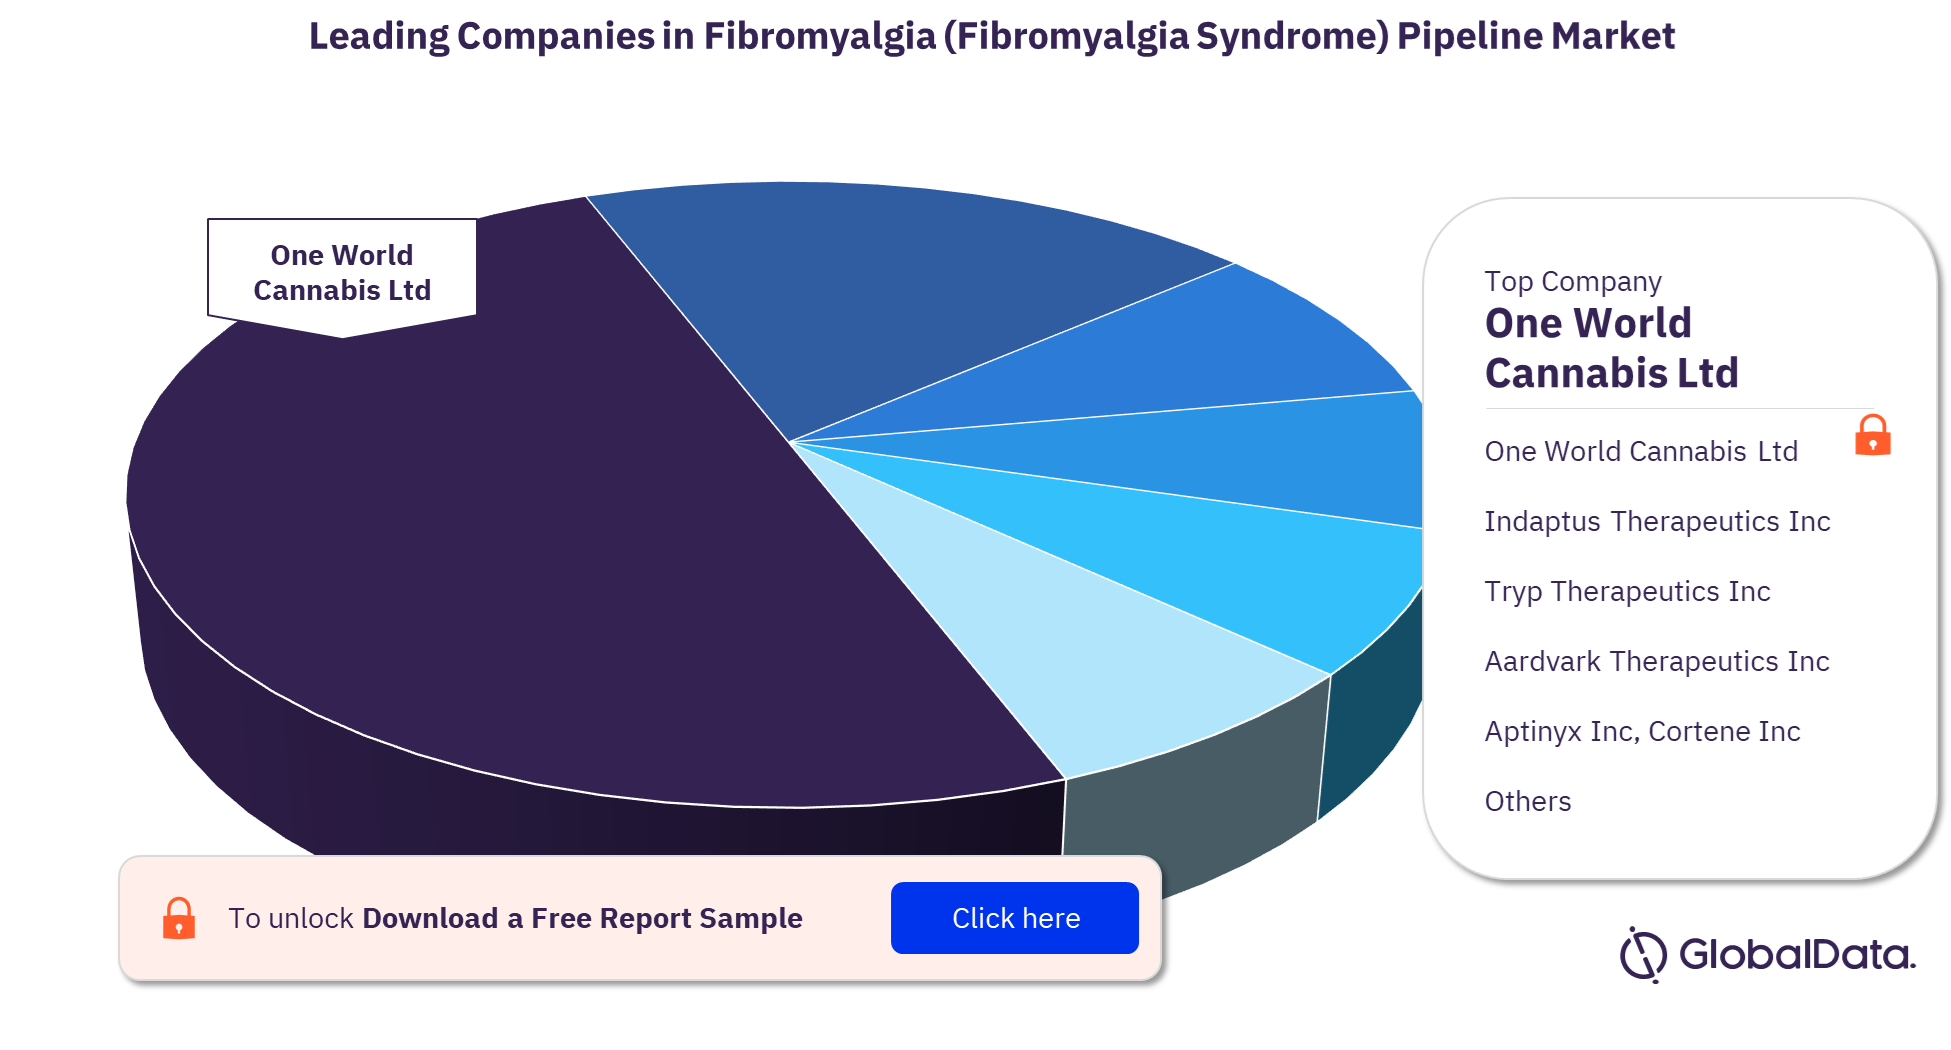 Fibromyalgia pipeline products market, by companies